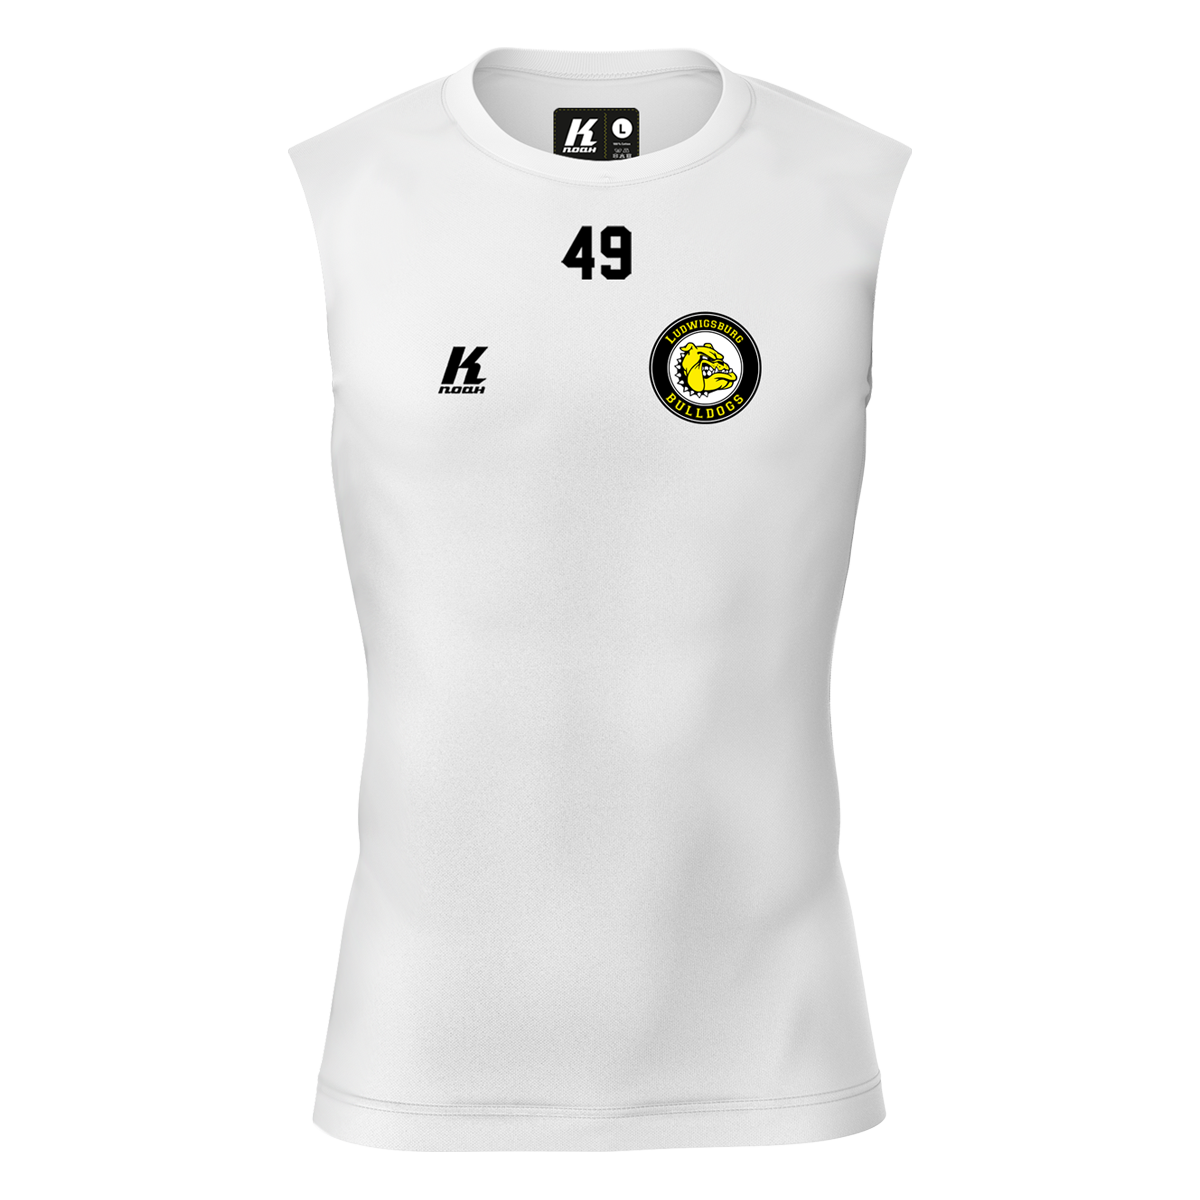 LB-Bulldogs K.Tech Compression Sleeveless Shirt white with Playernumber/Initials